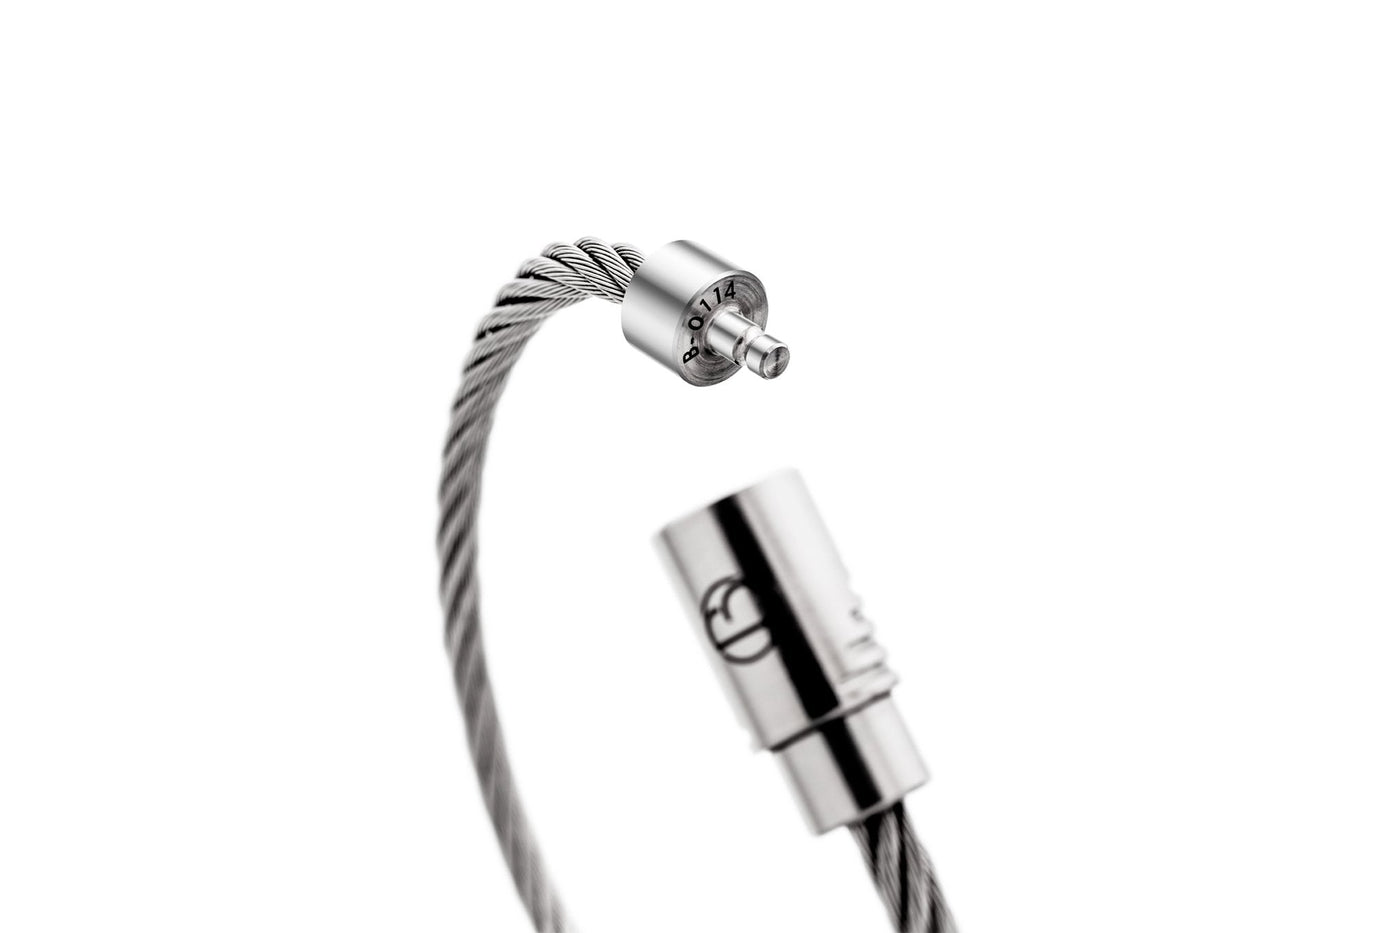 Fully Loaded CABLE Stainless Steel Bracelet - Free Text Engraving*